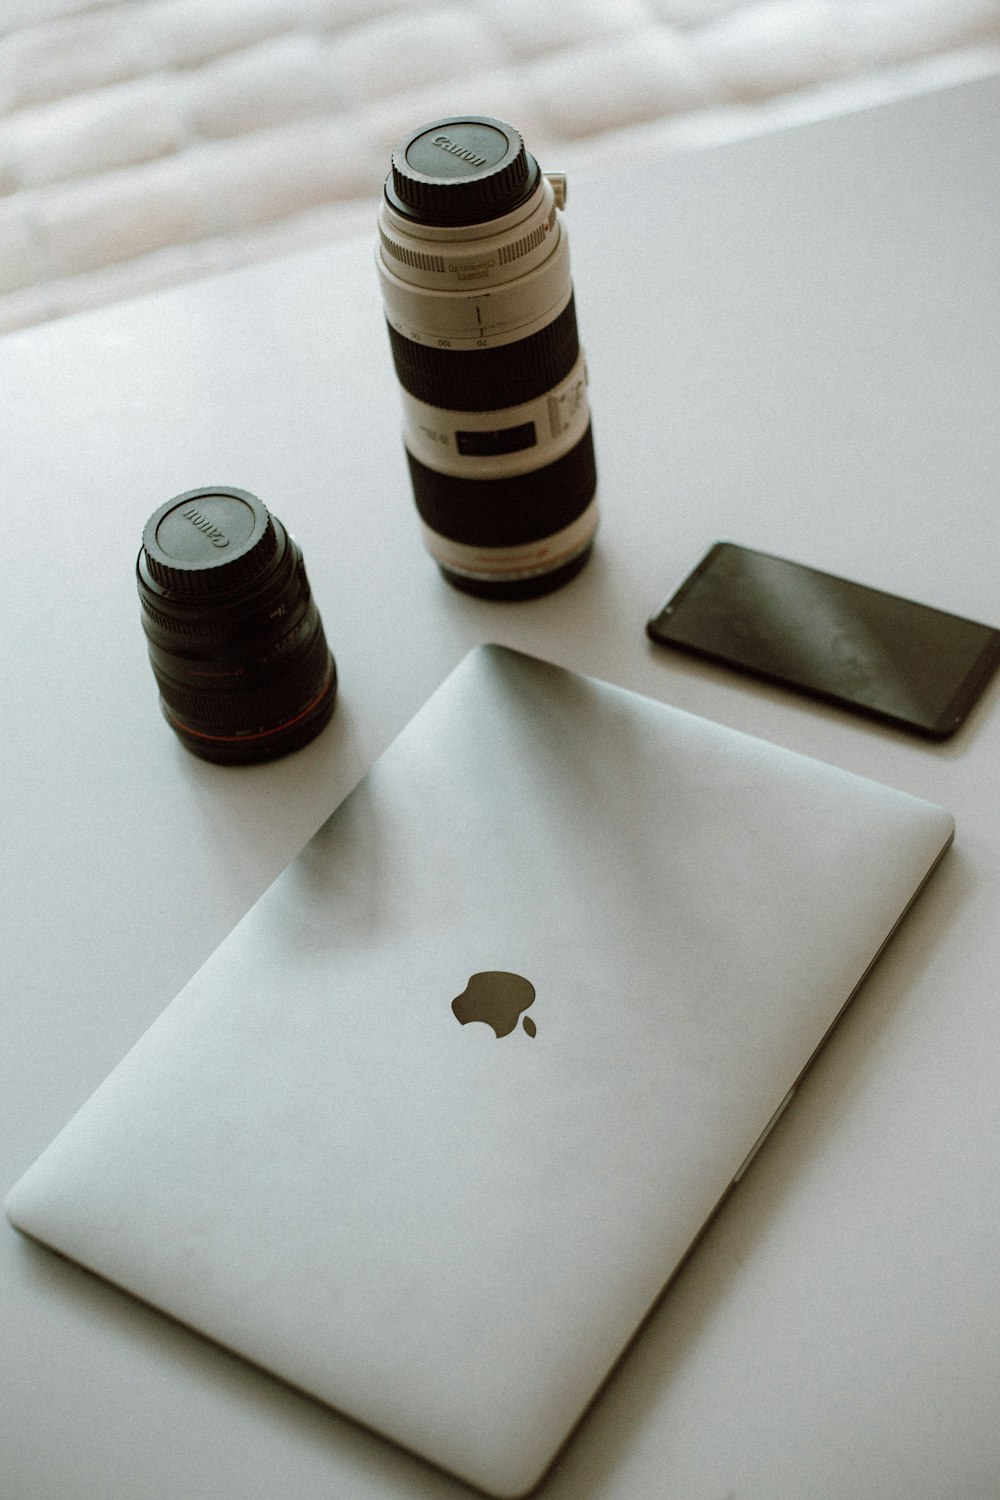 silver MacBook and white and black DSLR camera lens on gray surface